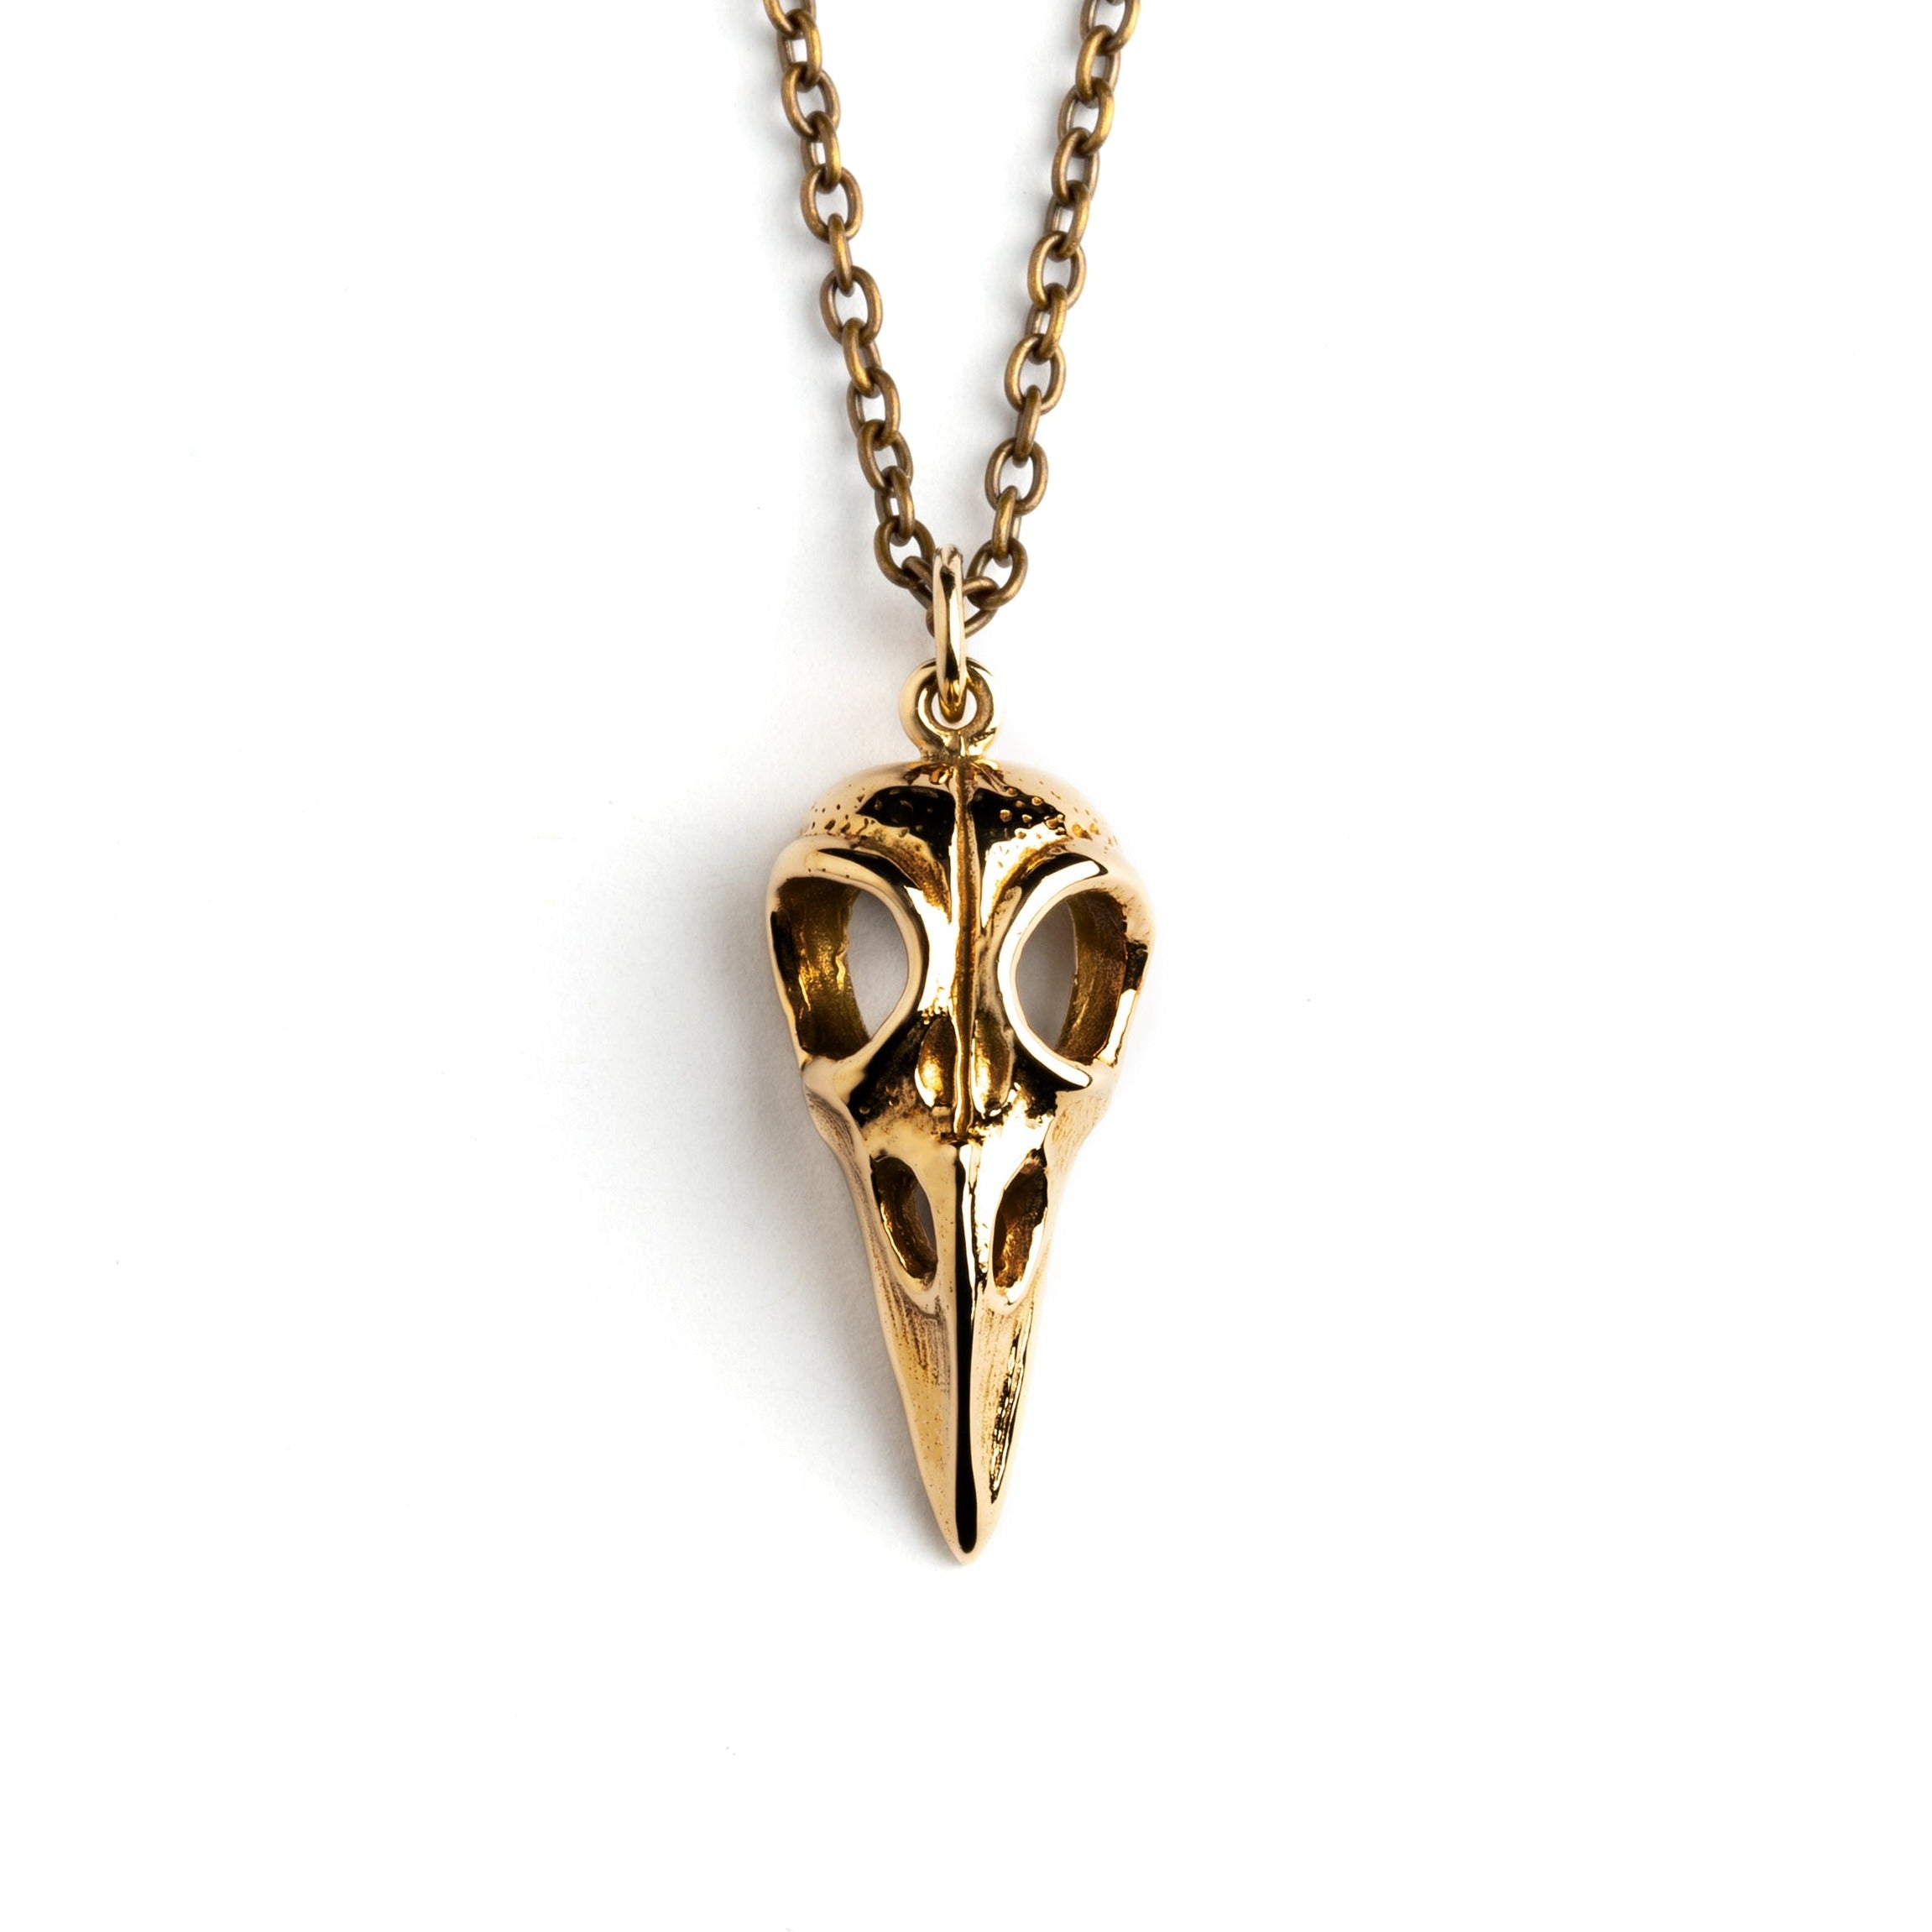 Bronze raven skull necklace frontal view